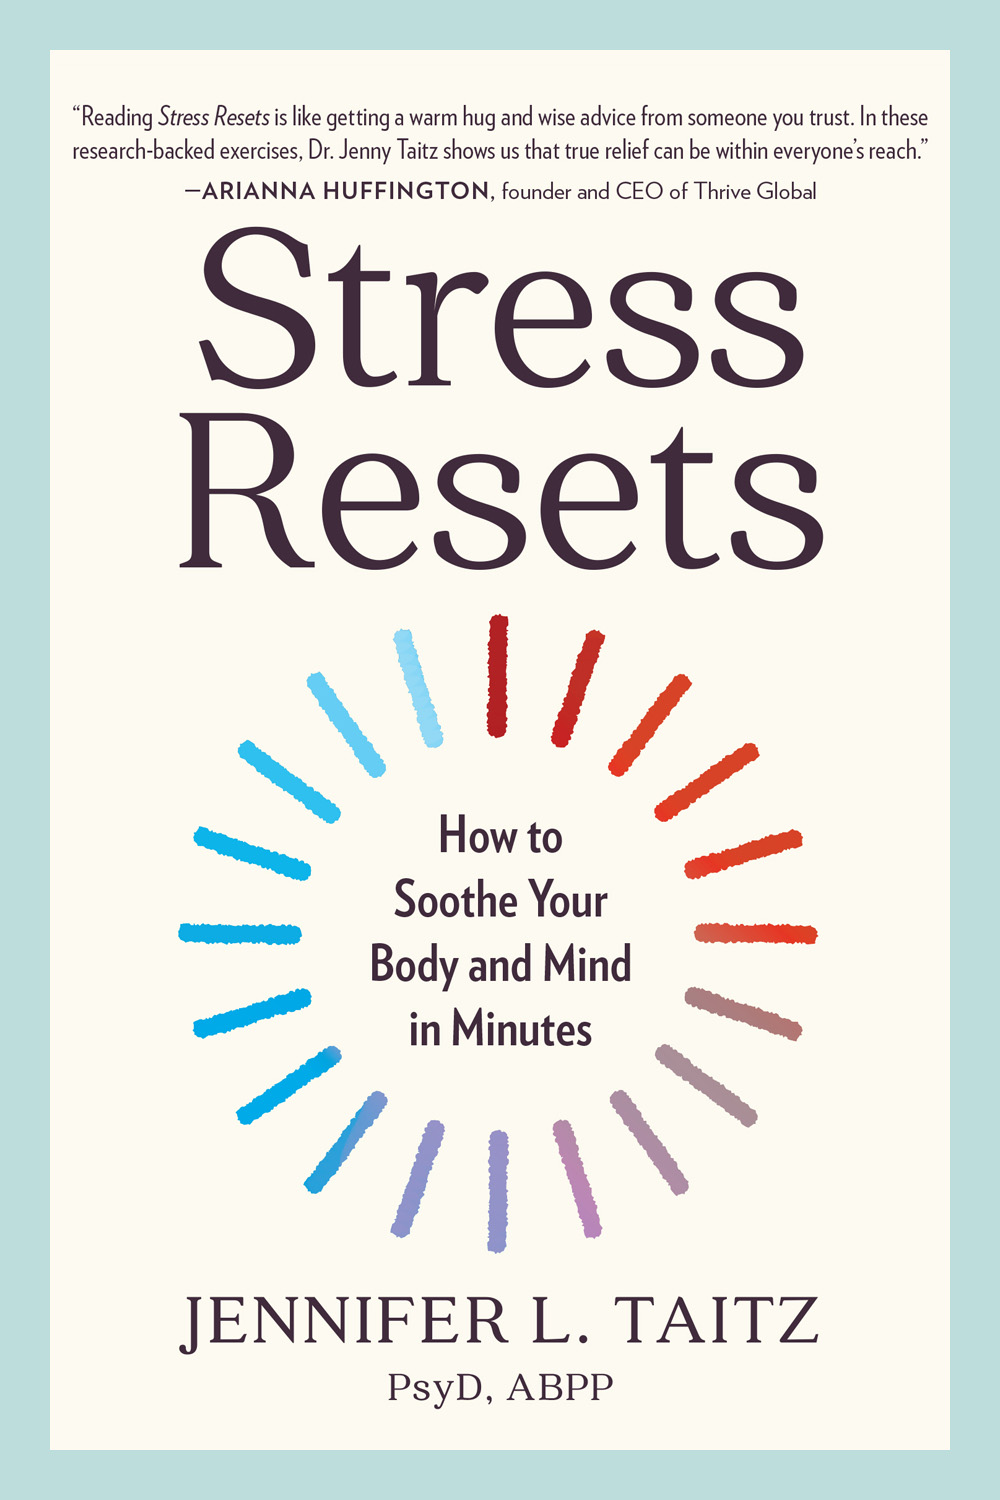 Stress Resets: How to Soothe Your Body and Mind in Minutes